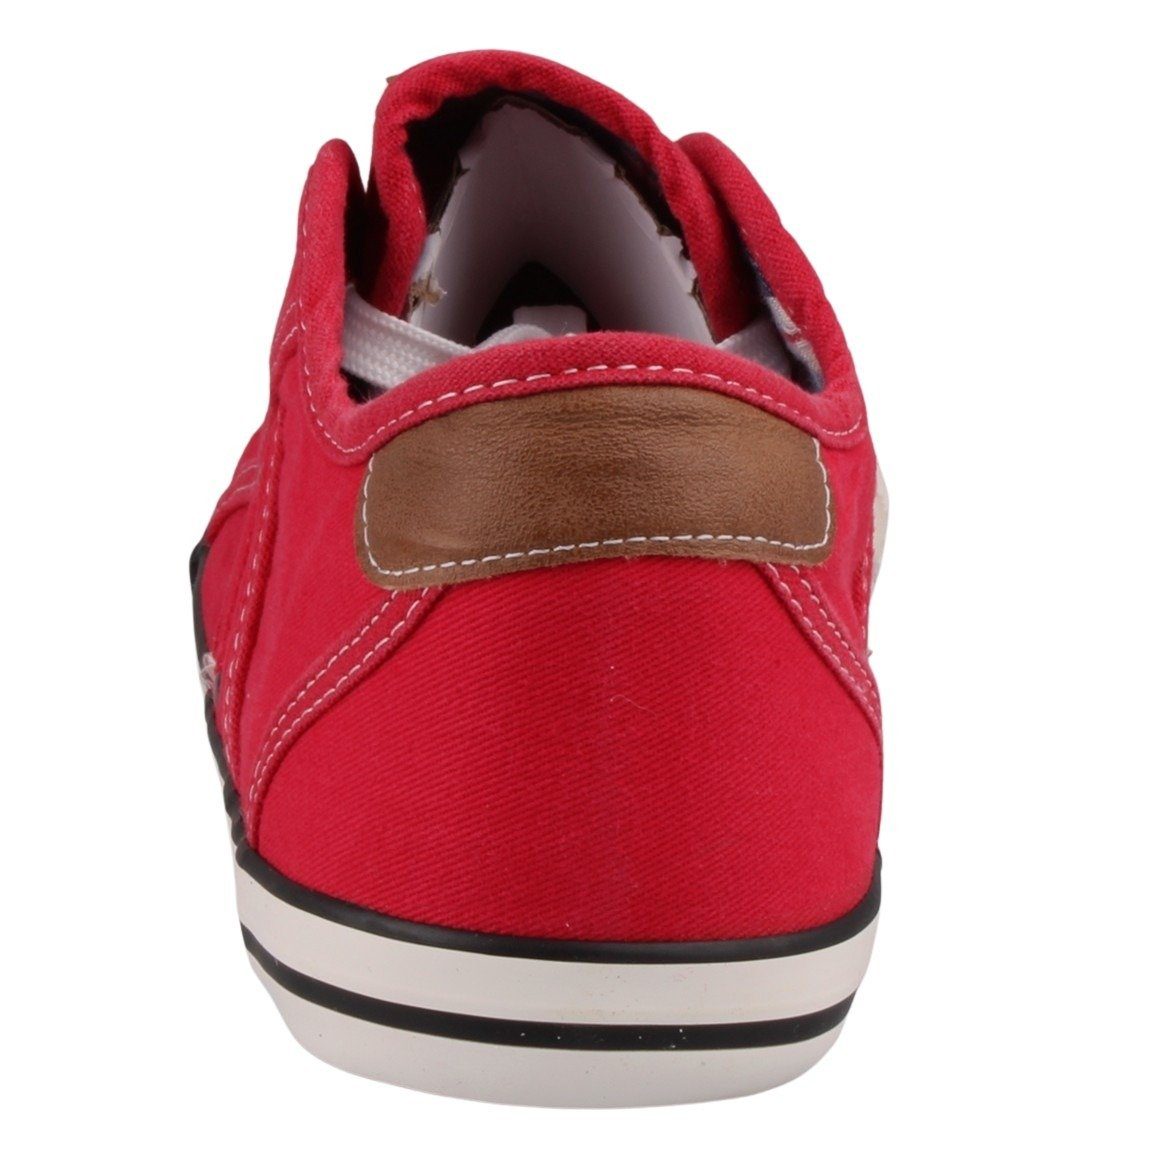 1099302/5 Shoes Rot Sneaker Mustang